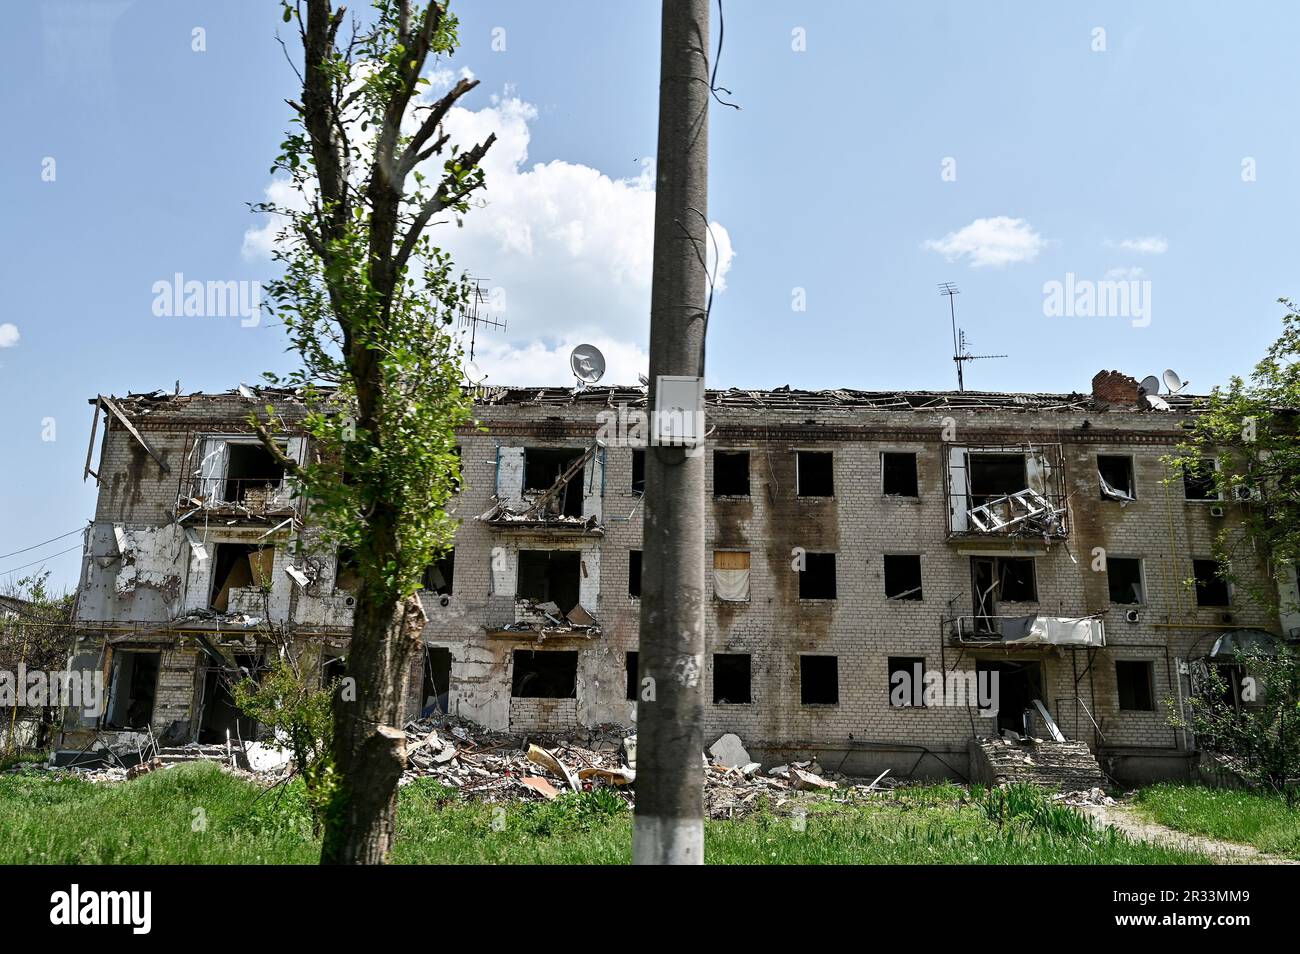 Non Exclusive: ZAPORIZHZHIA REGION, UKRAINE - MAY 18, 2023 - A three-storey residential building damaged as a result of numerous shelling attacks byth Stock Photo